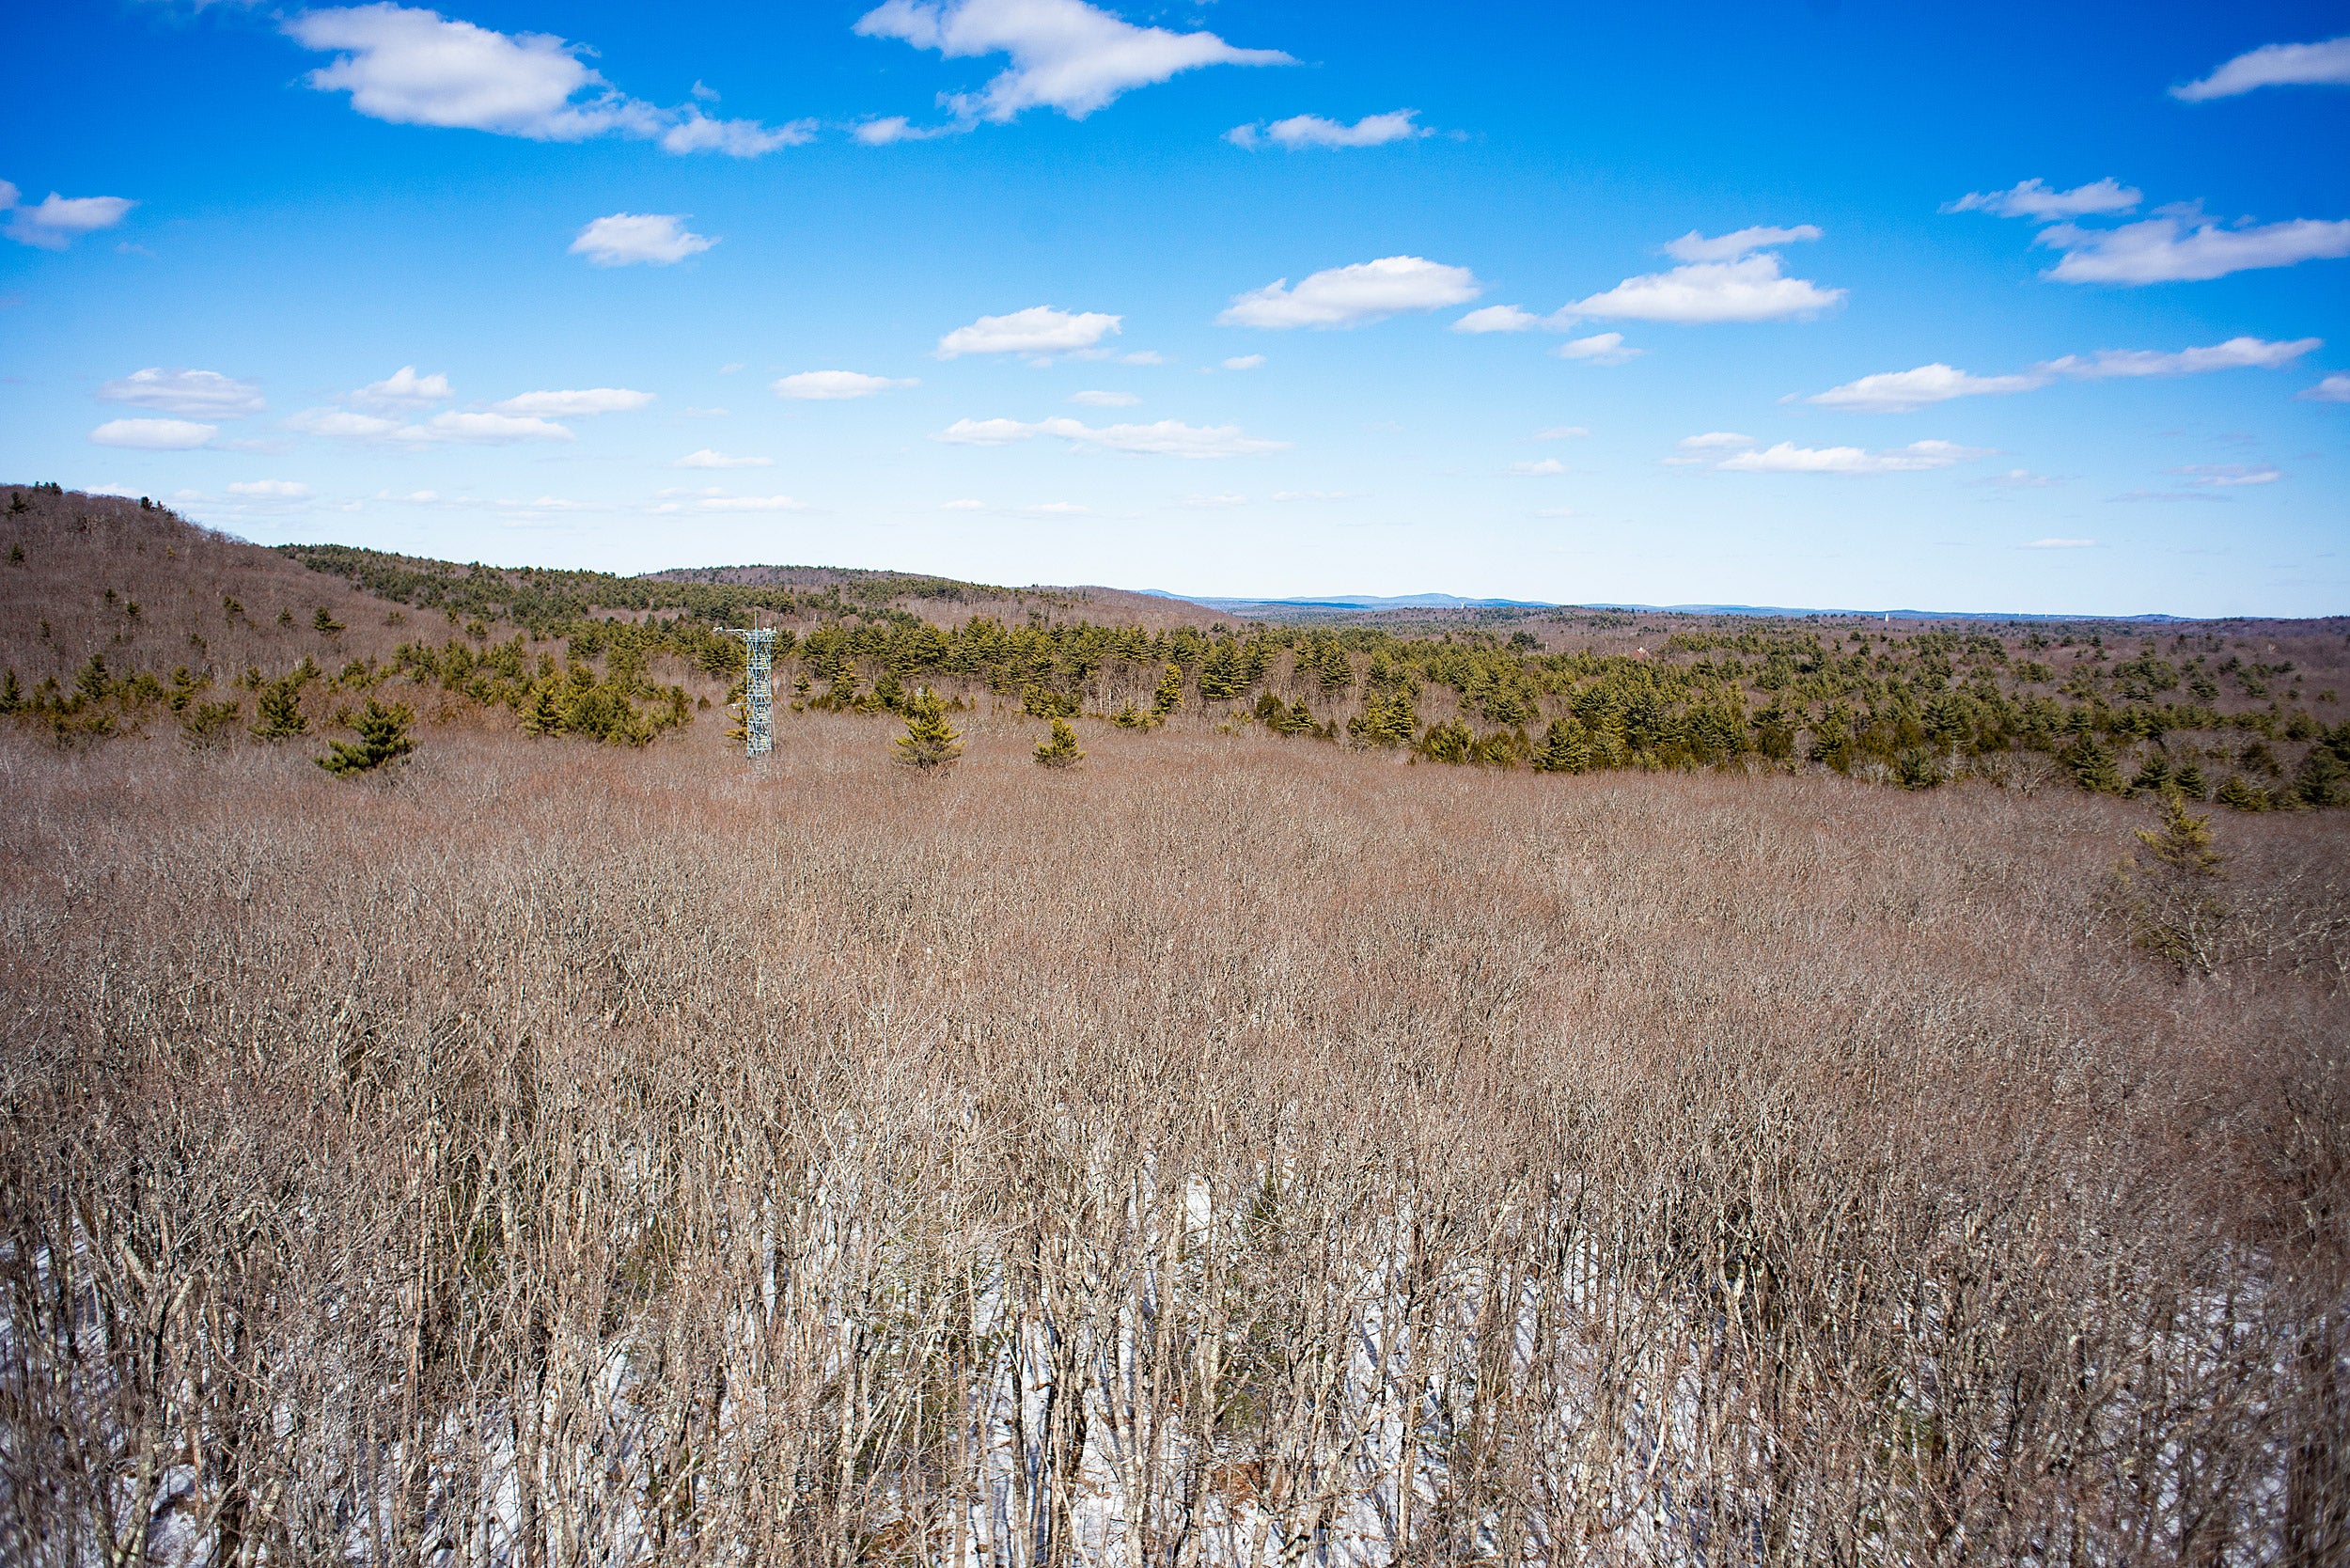 View from tower of Harvard Forest.